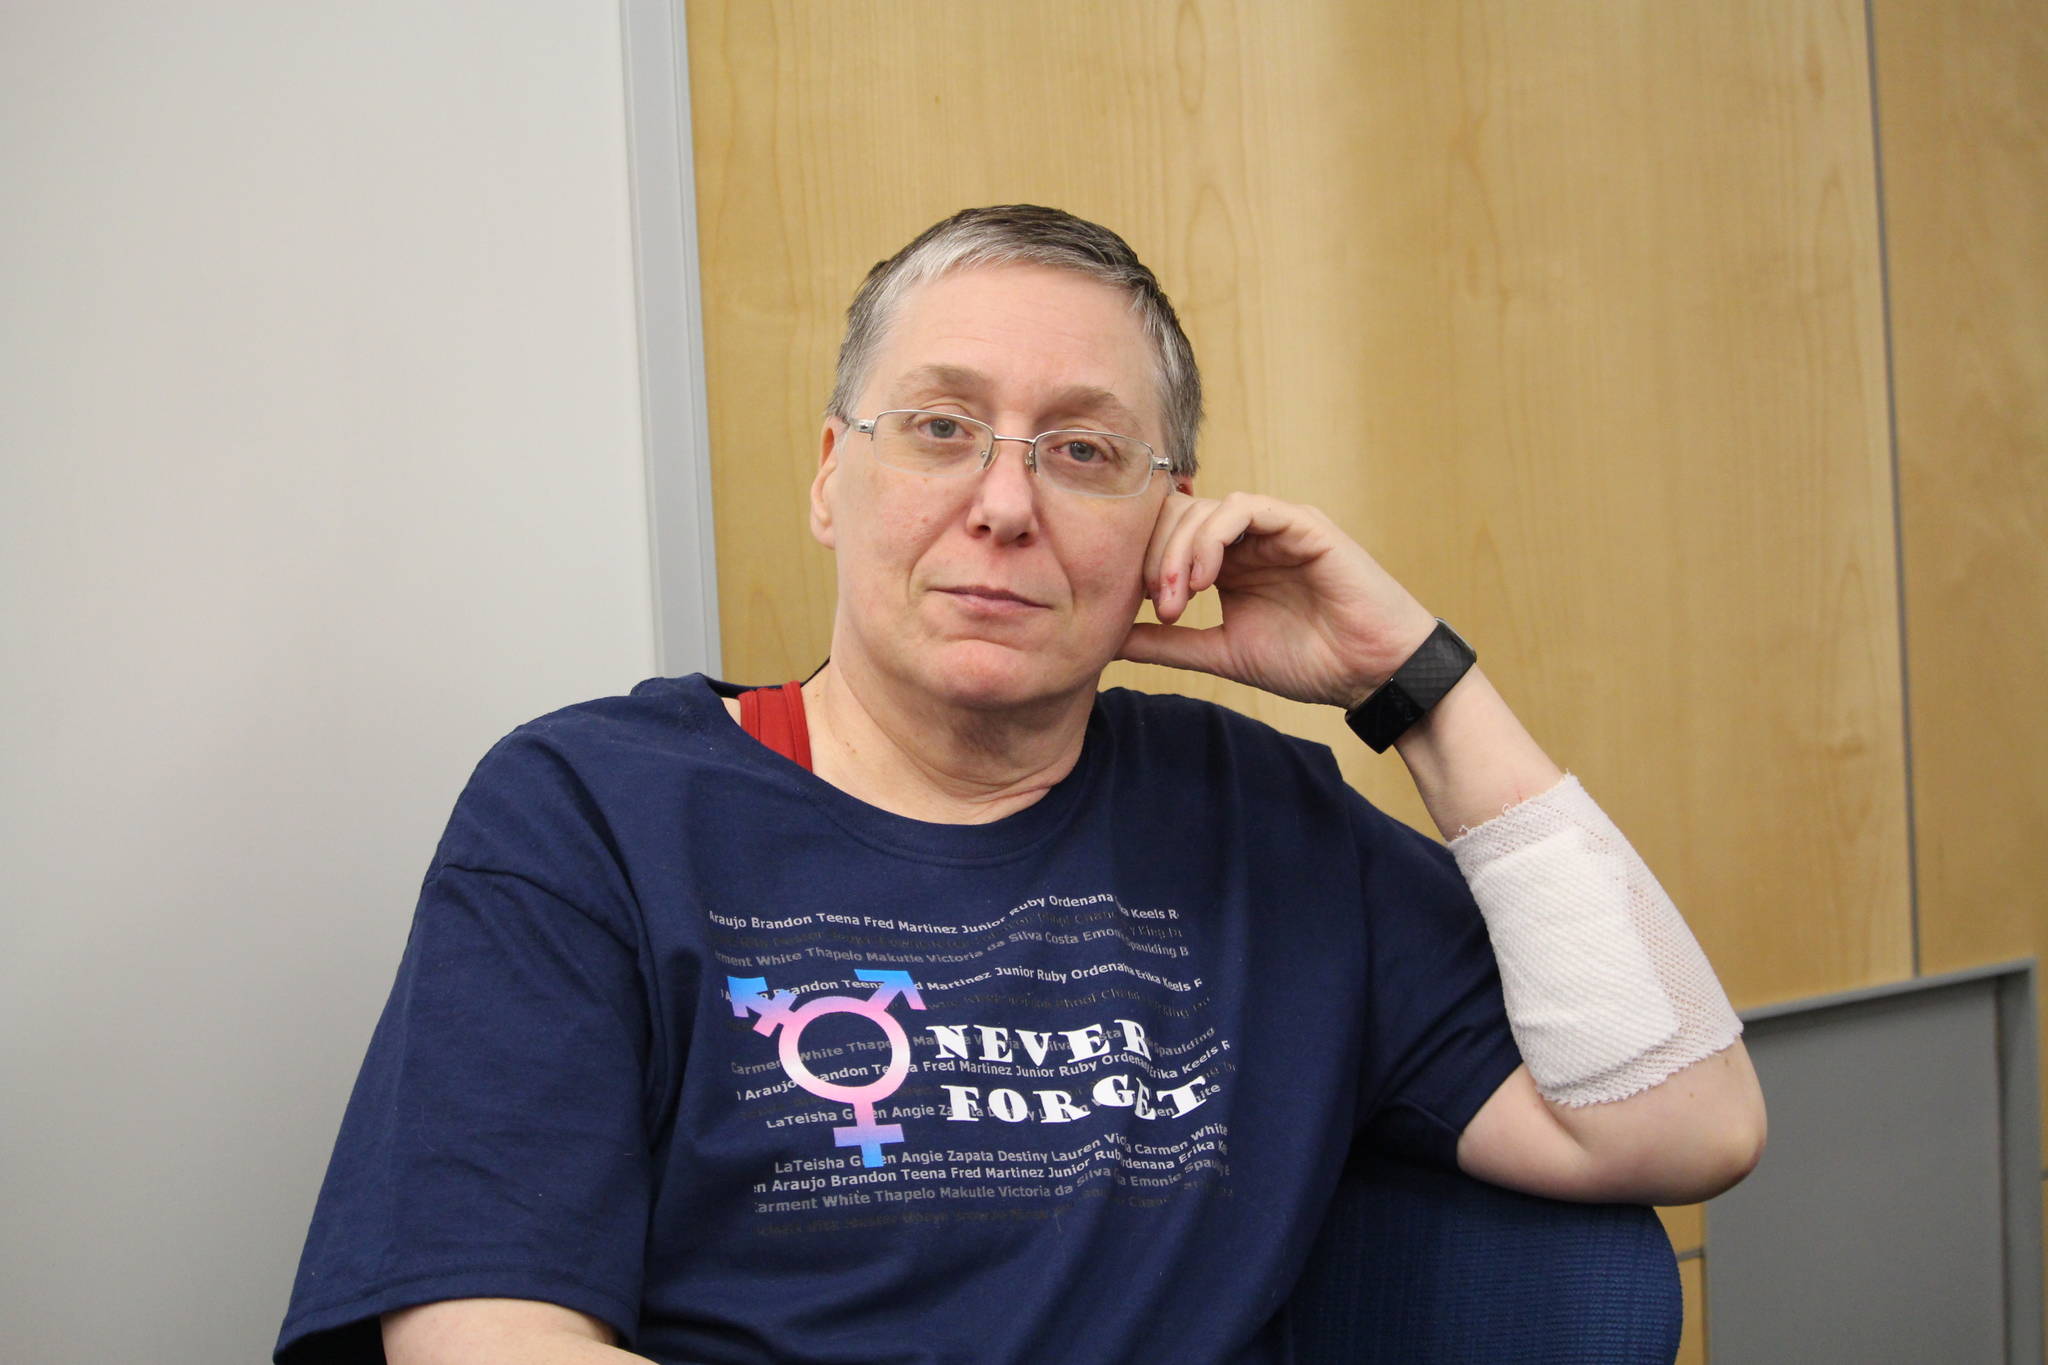 Tammie Willis is seen here at Kenai Peninsula College on Dec. 19, 2019. The bandage on her arm covers some of the cuts Willis received while being attacked at her home on Dec. 9. (Photo by Brian Mazurek/Peninsula Clarion)